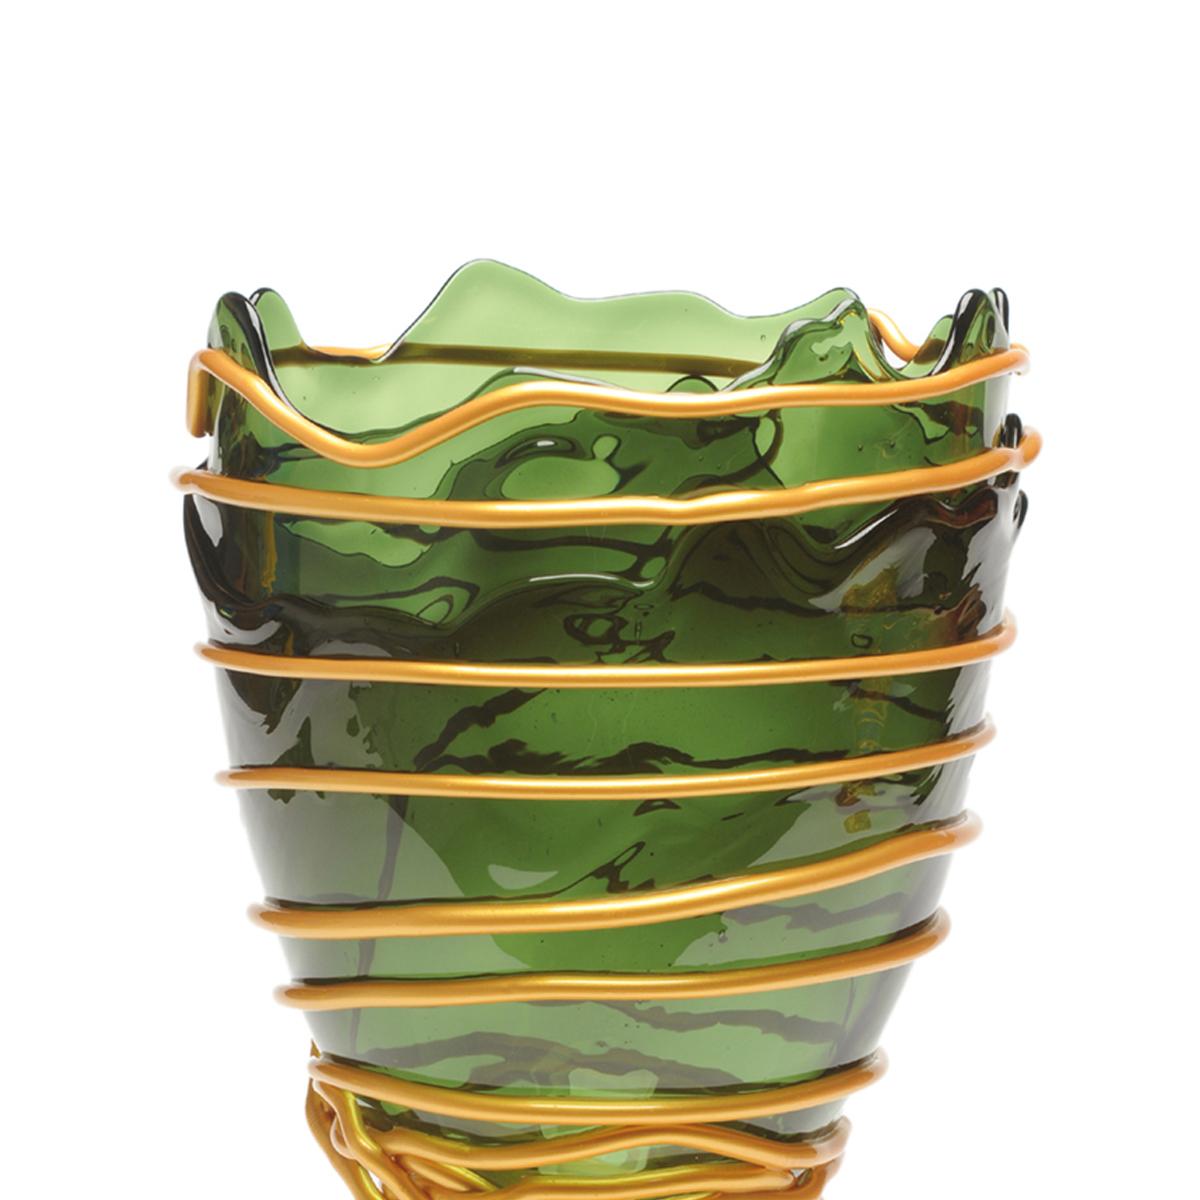 Pompitu II vase, green and gold.

Vase in soft resin designed by Gaetano Pesce in 1995 for Fish Design collection.

Measures: M ø 16cm x H 26cm

Other sizes available

Colours: green and gold.
Vase in soft resin designed by Gaetano Pesce in